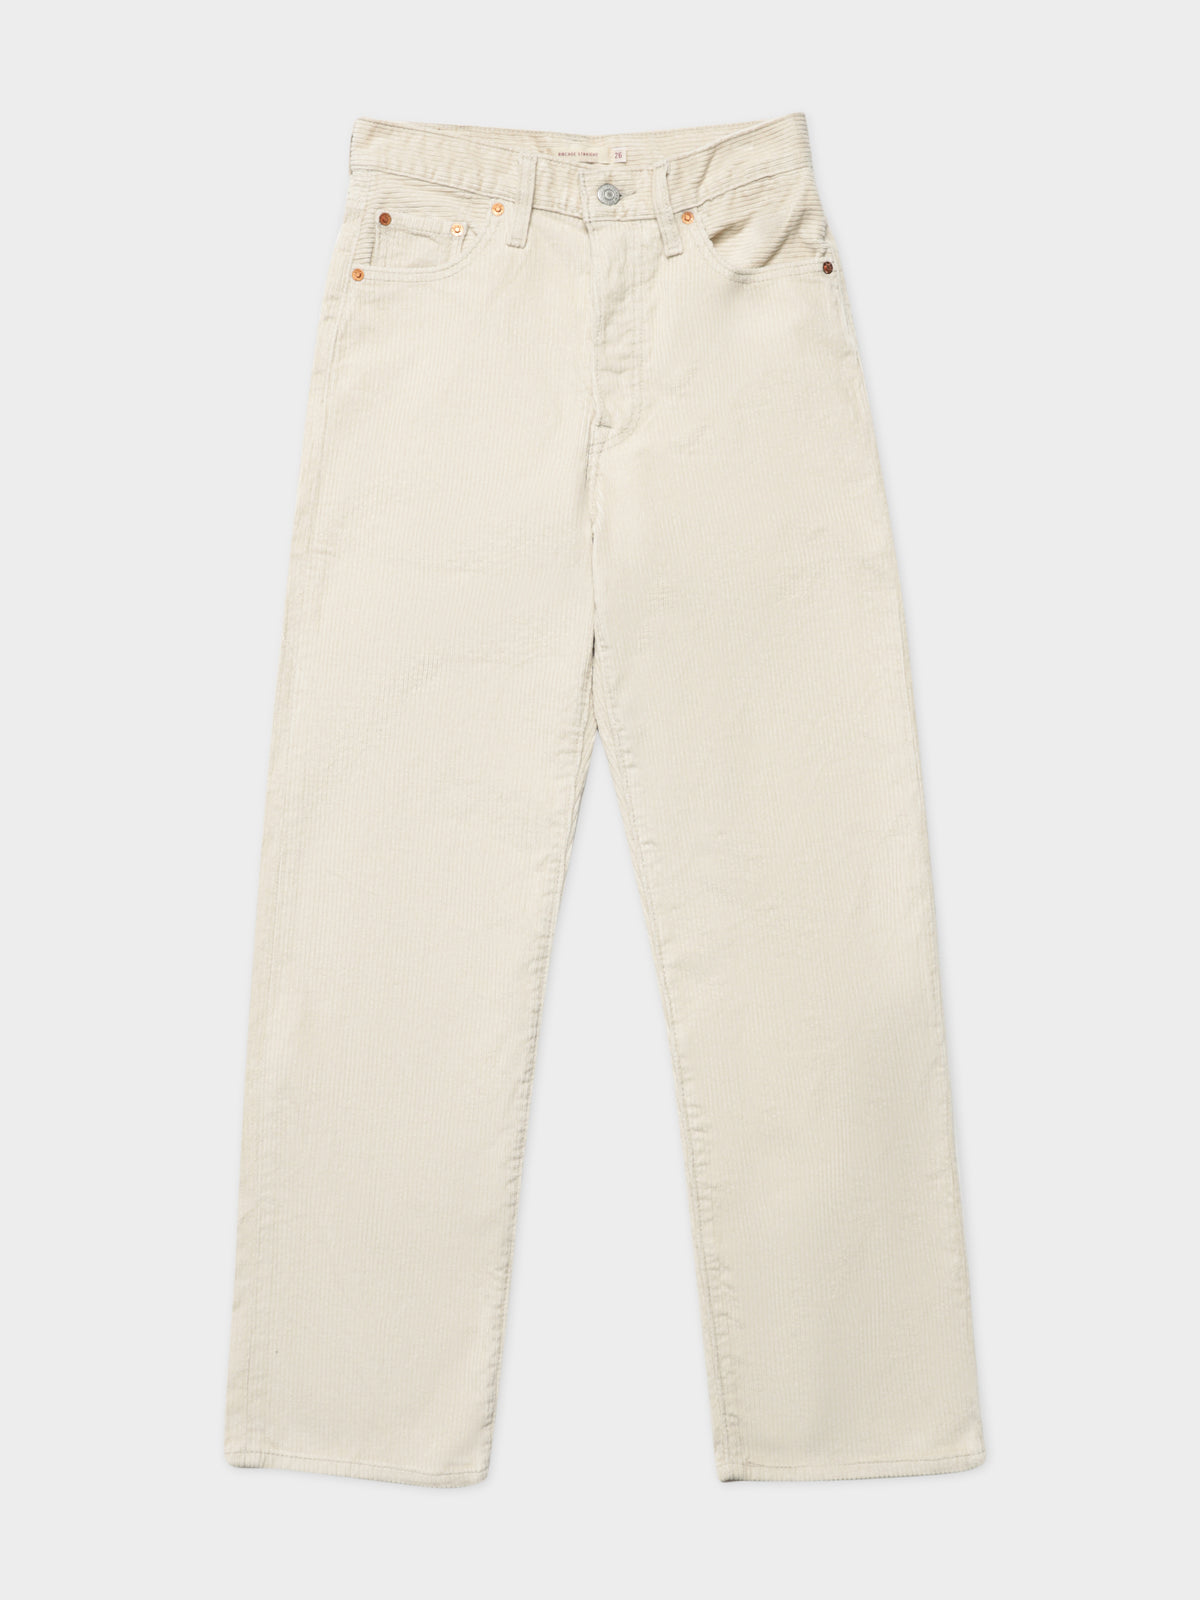 Ribcage Straight Ankle Corduroy Pants in Sandshell Wide Wale